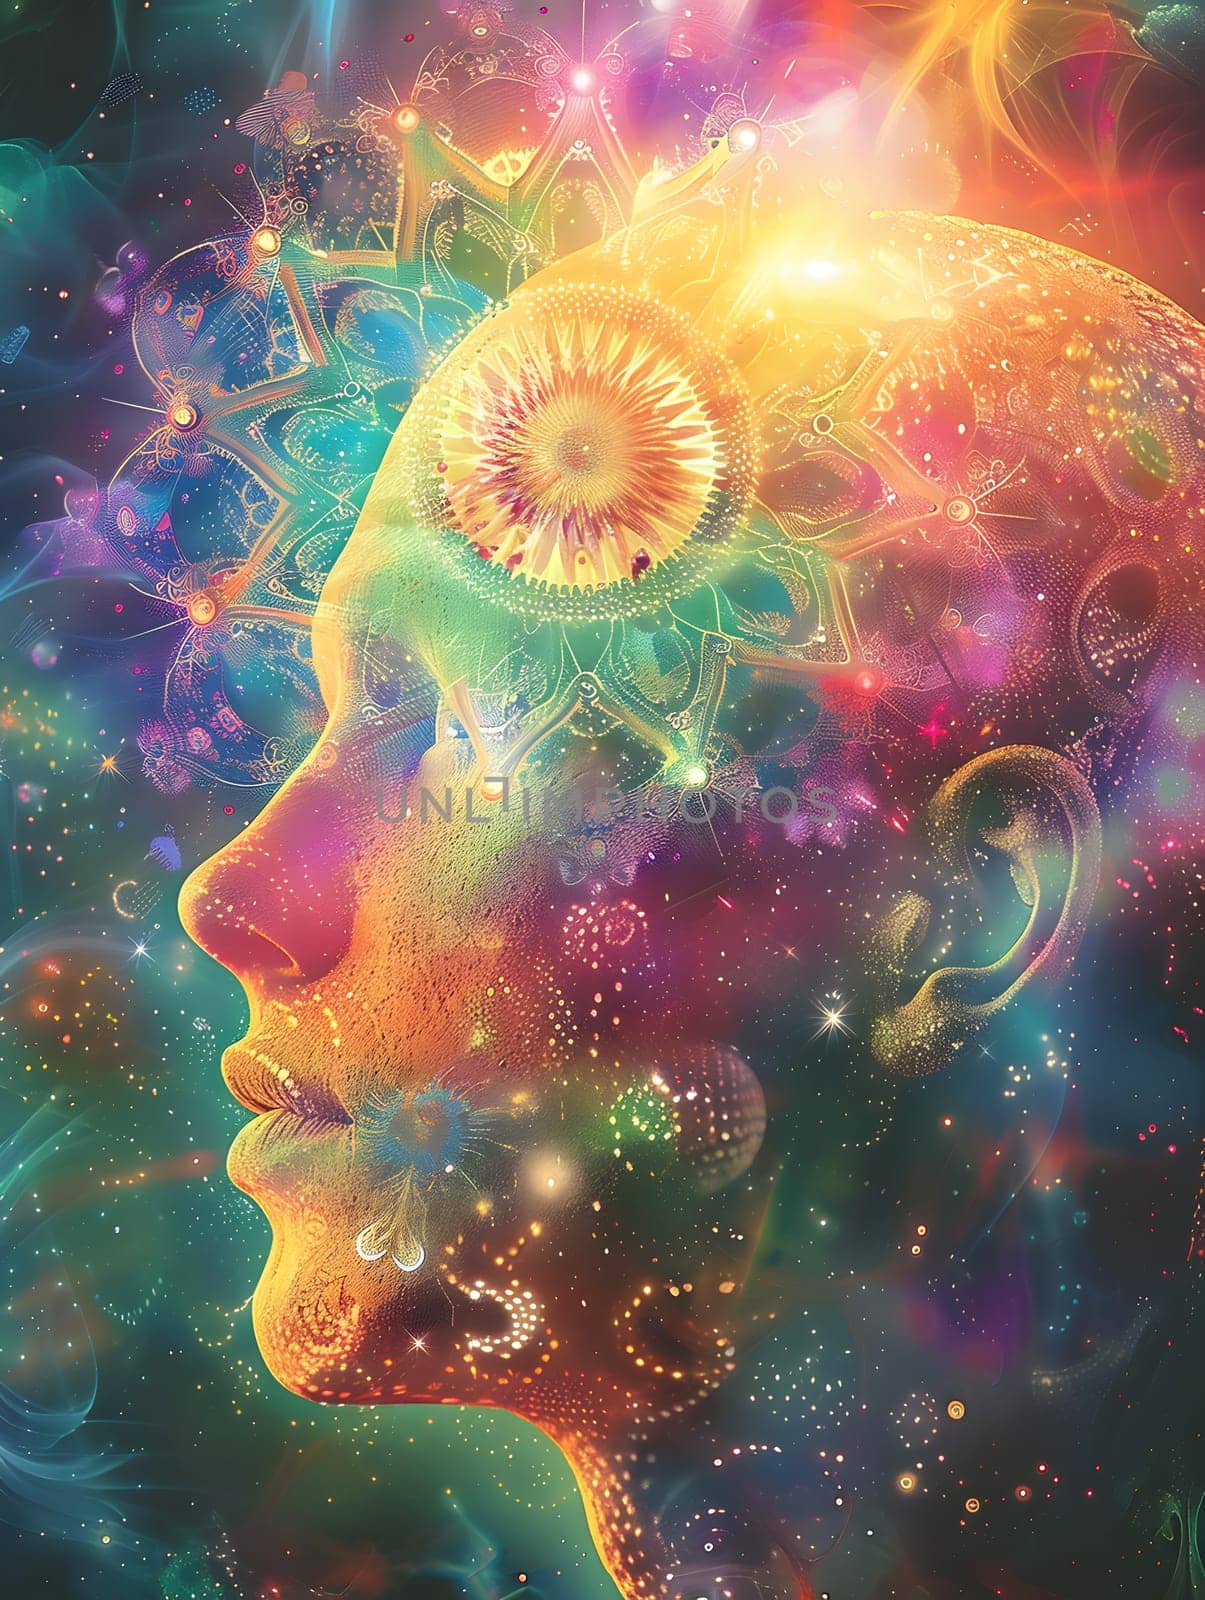 A vibrant painting portraying a womans face with a flower adorning her head, showcasing symmetry and patterns in fractal art style